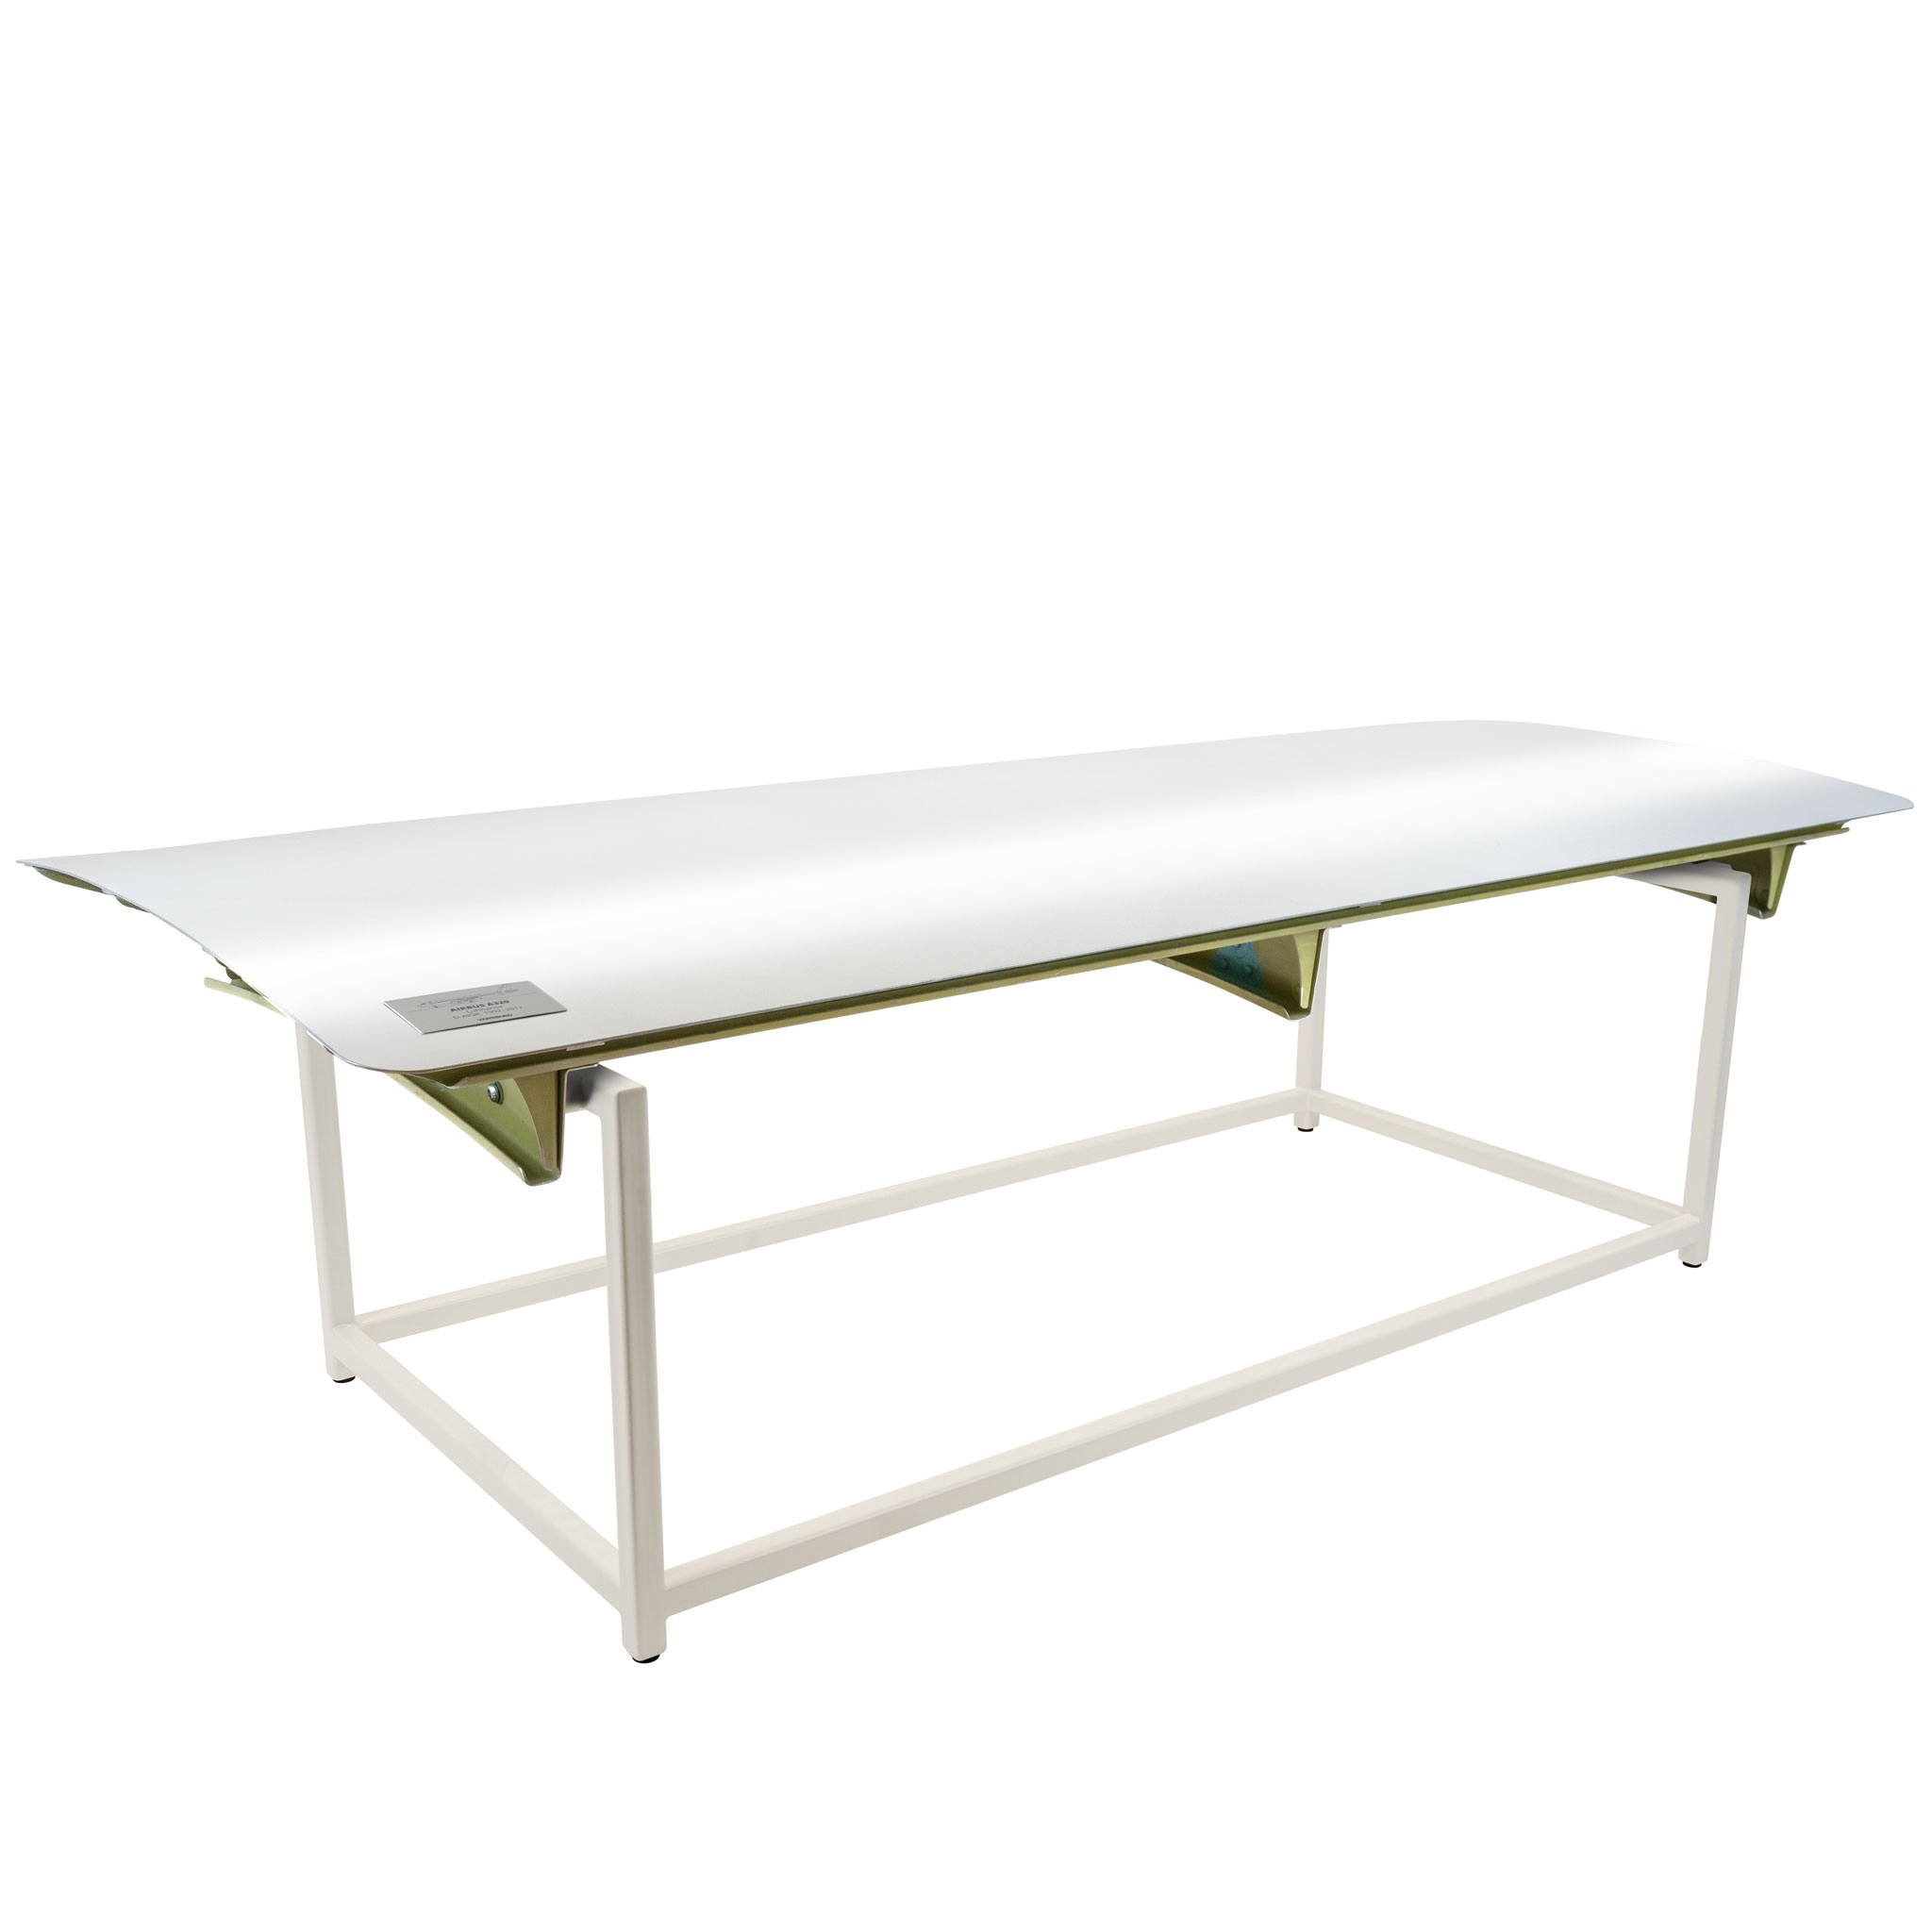 Coffee Table from Aircraft Parts, Authentic Aircraft Paint, Frame: White, approx. 116 x 59 cm